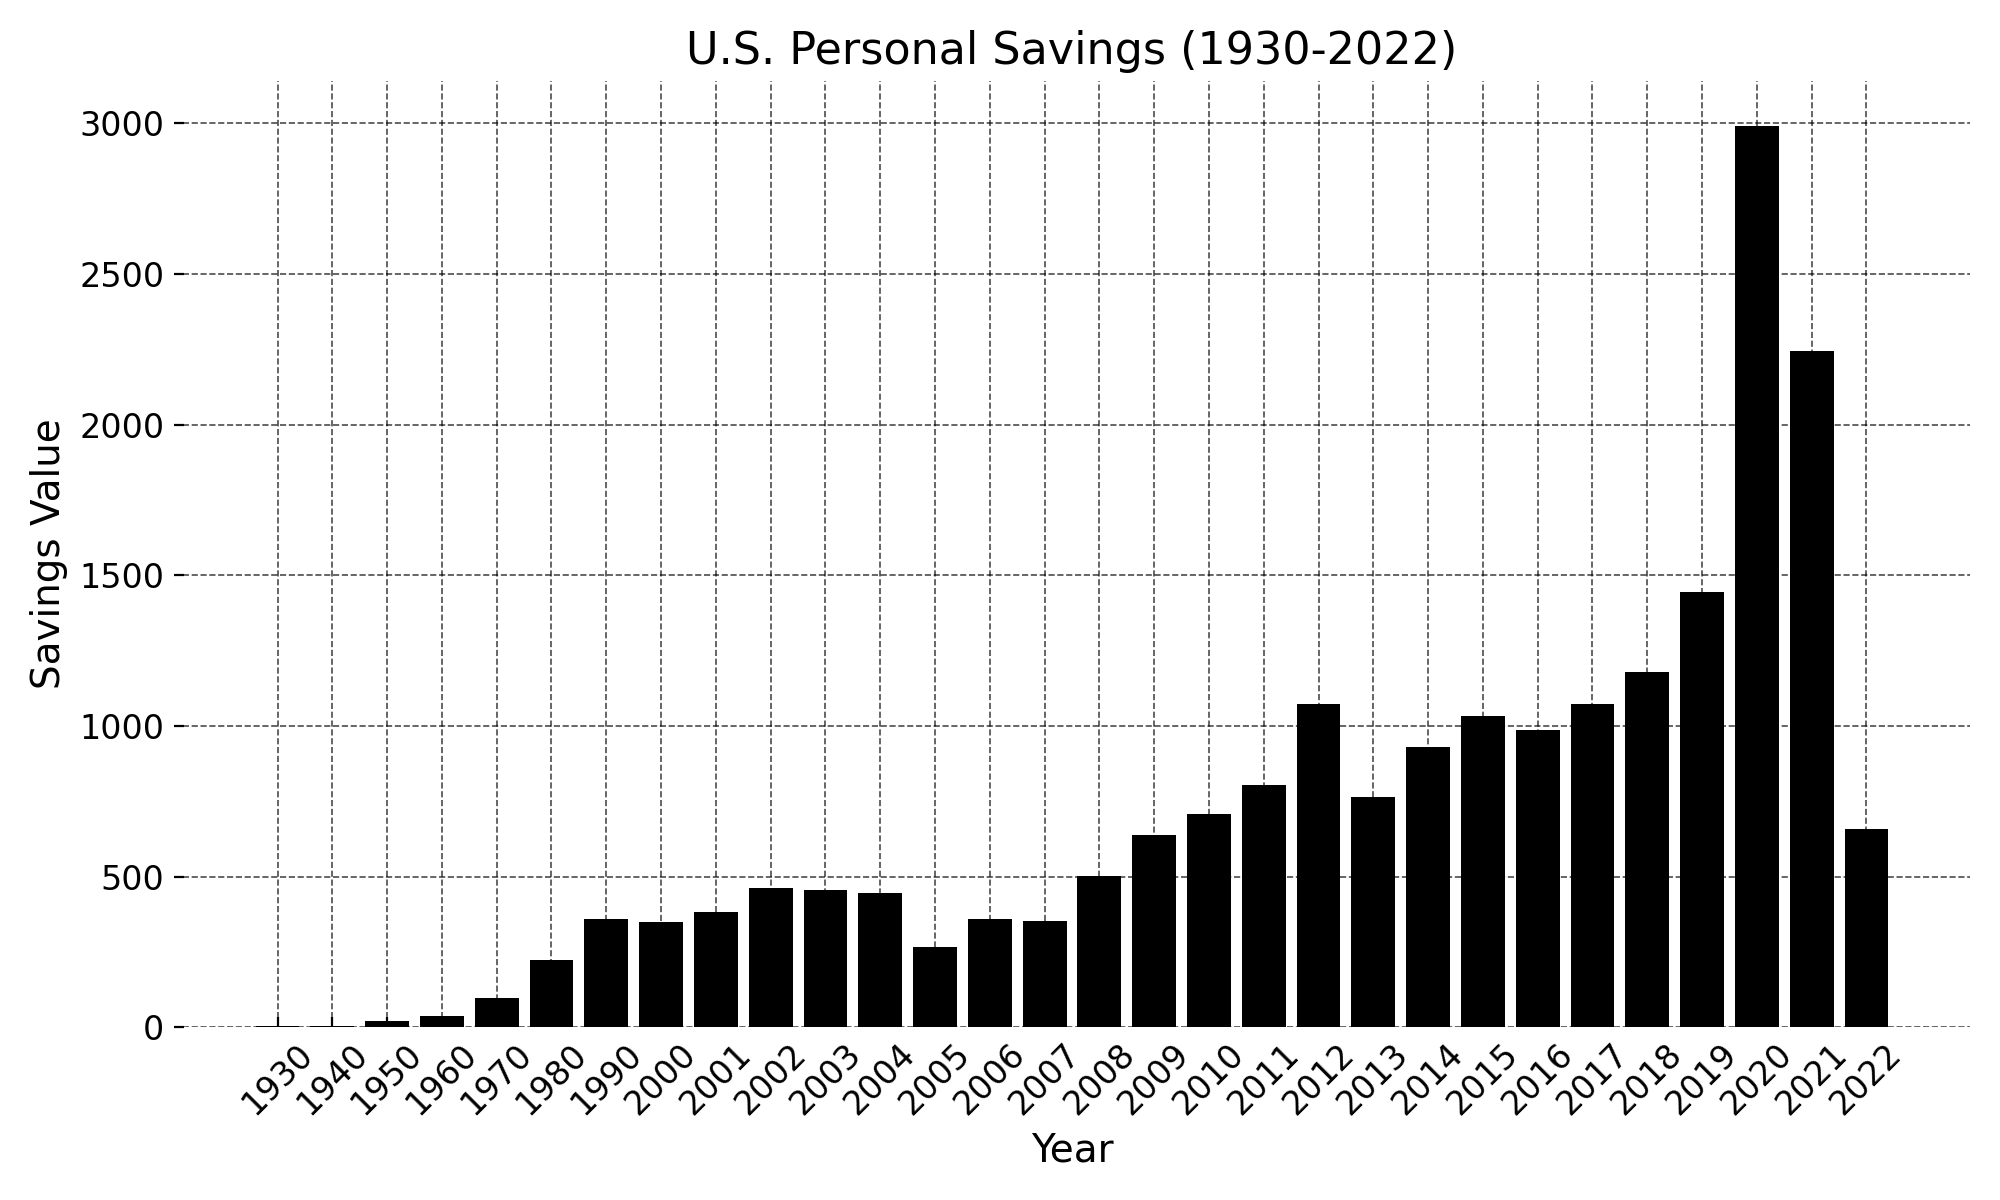 A chart showing annual U.S. personal savings values.